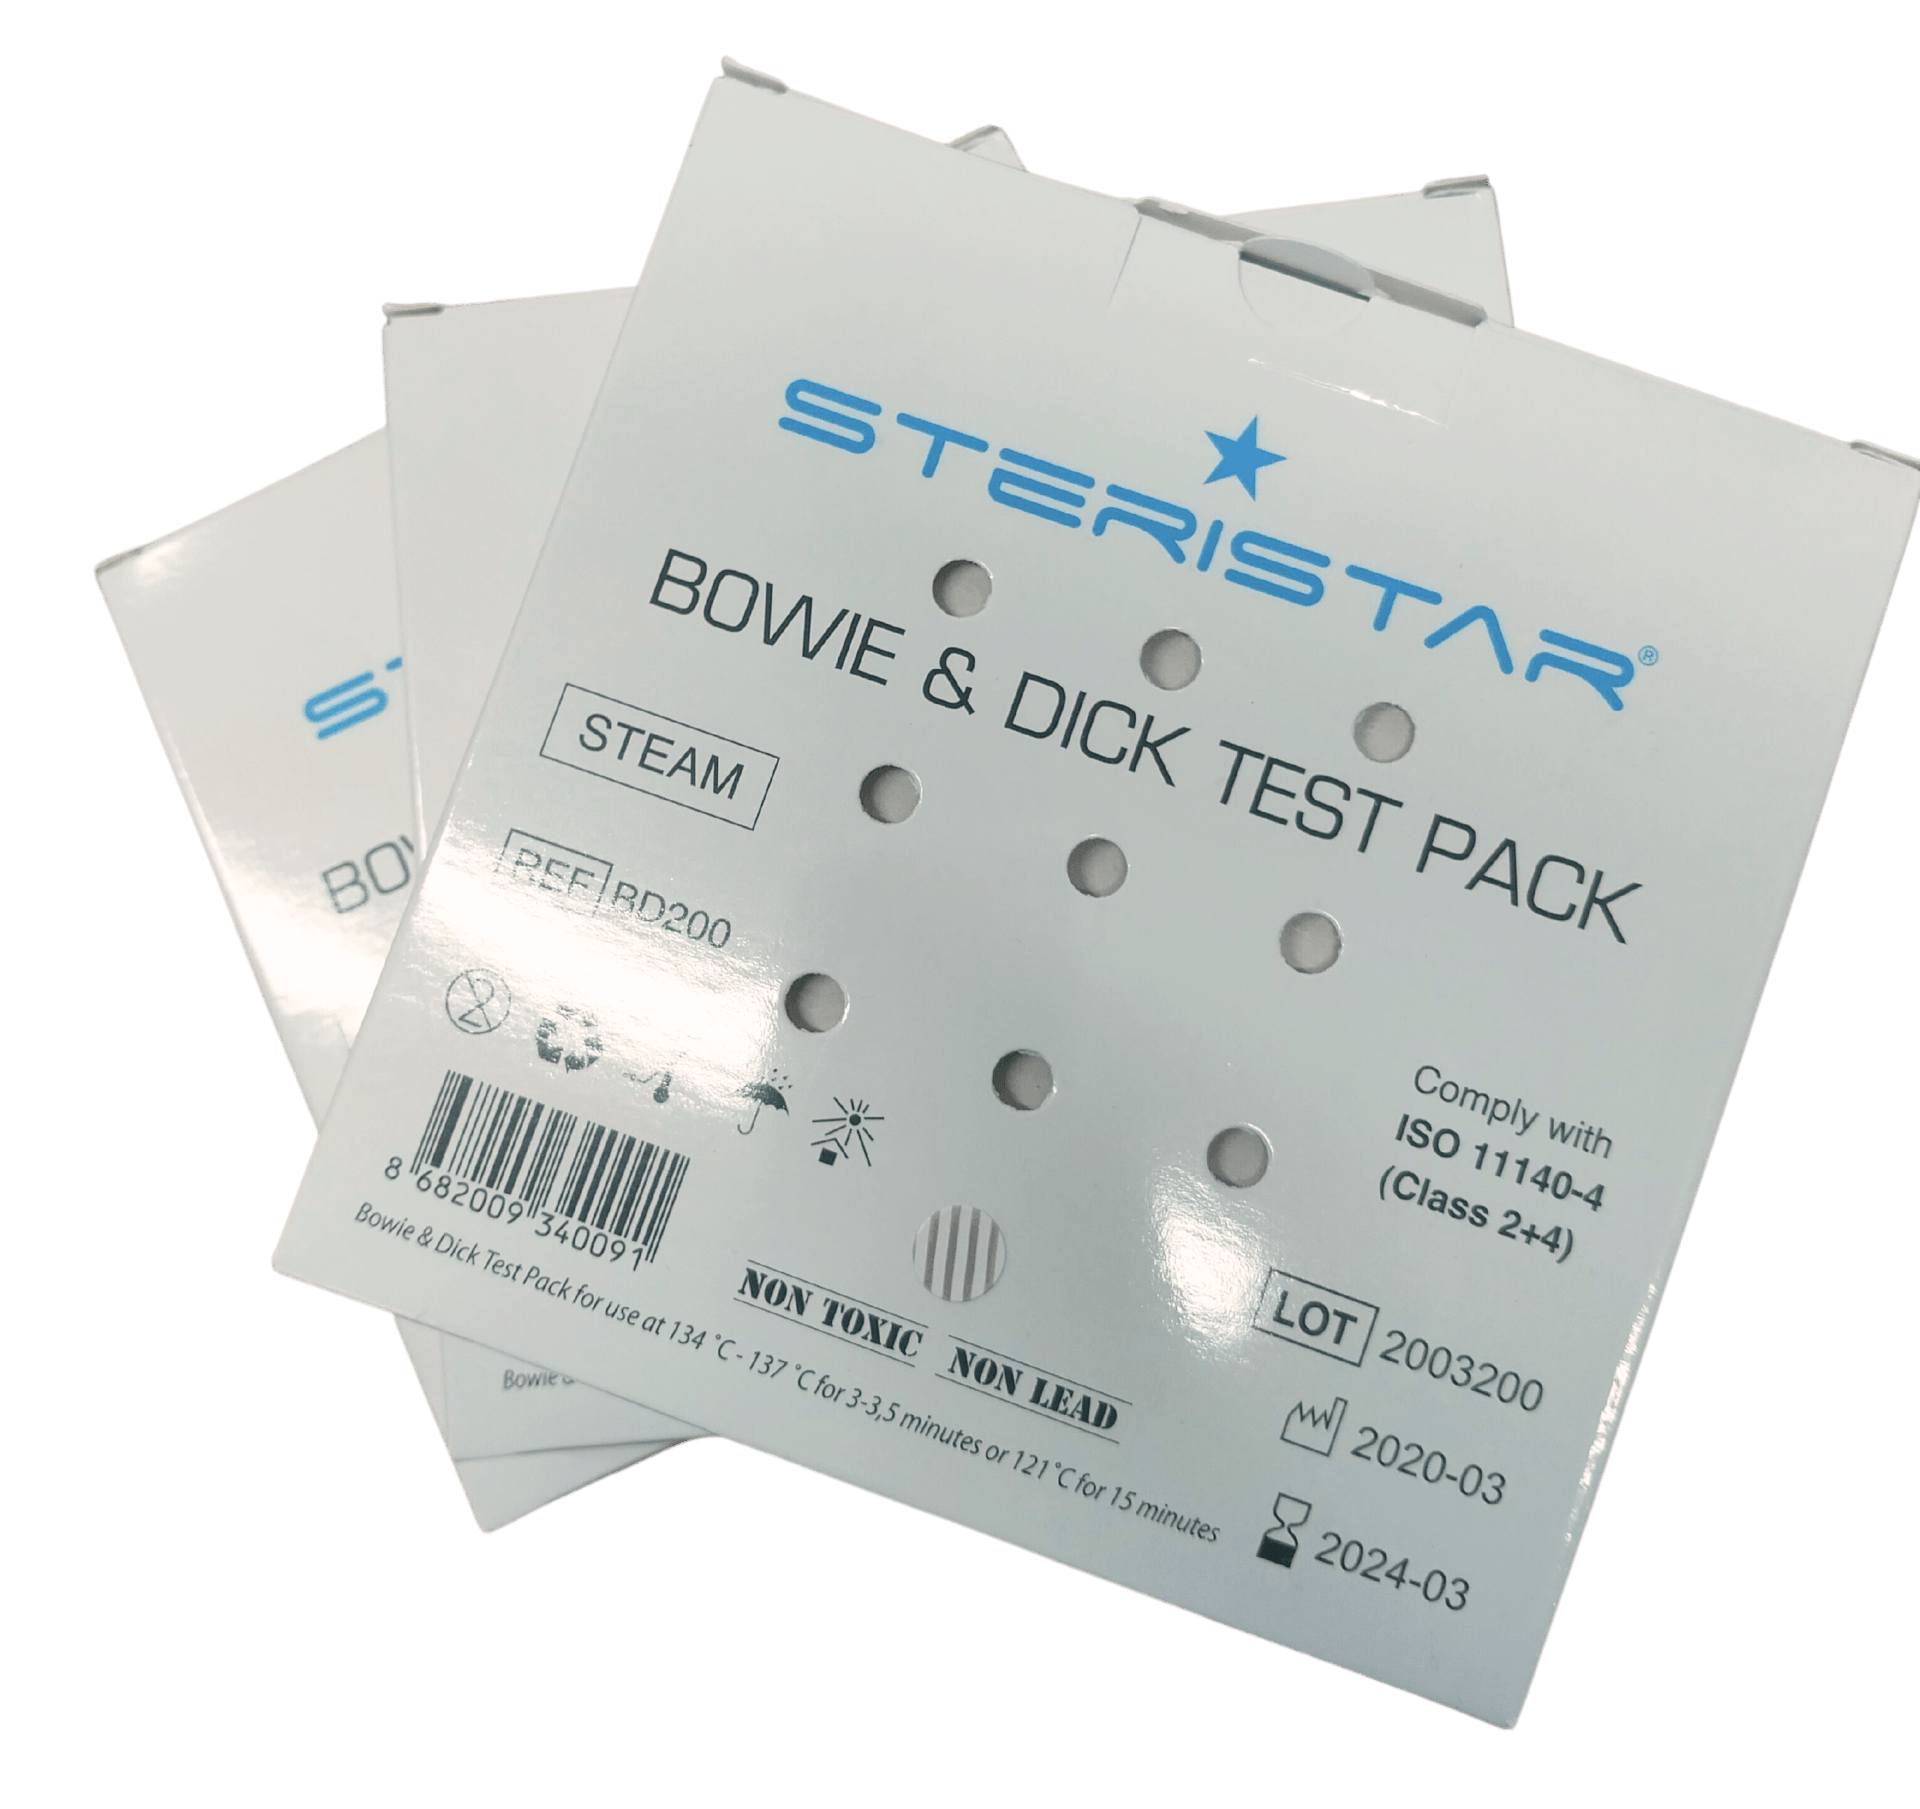 Photo of three Steristar brand Bowie and Dick Test Packs for Steam Sterilisers